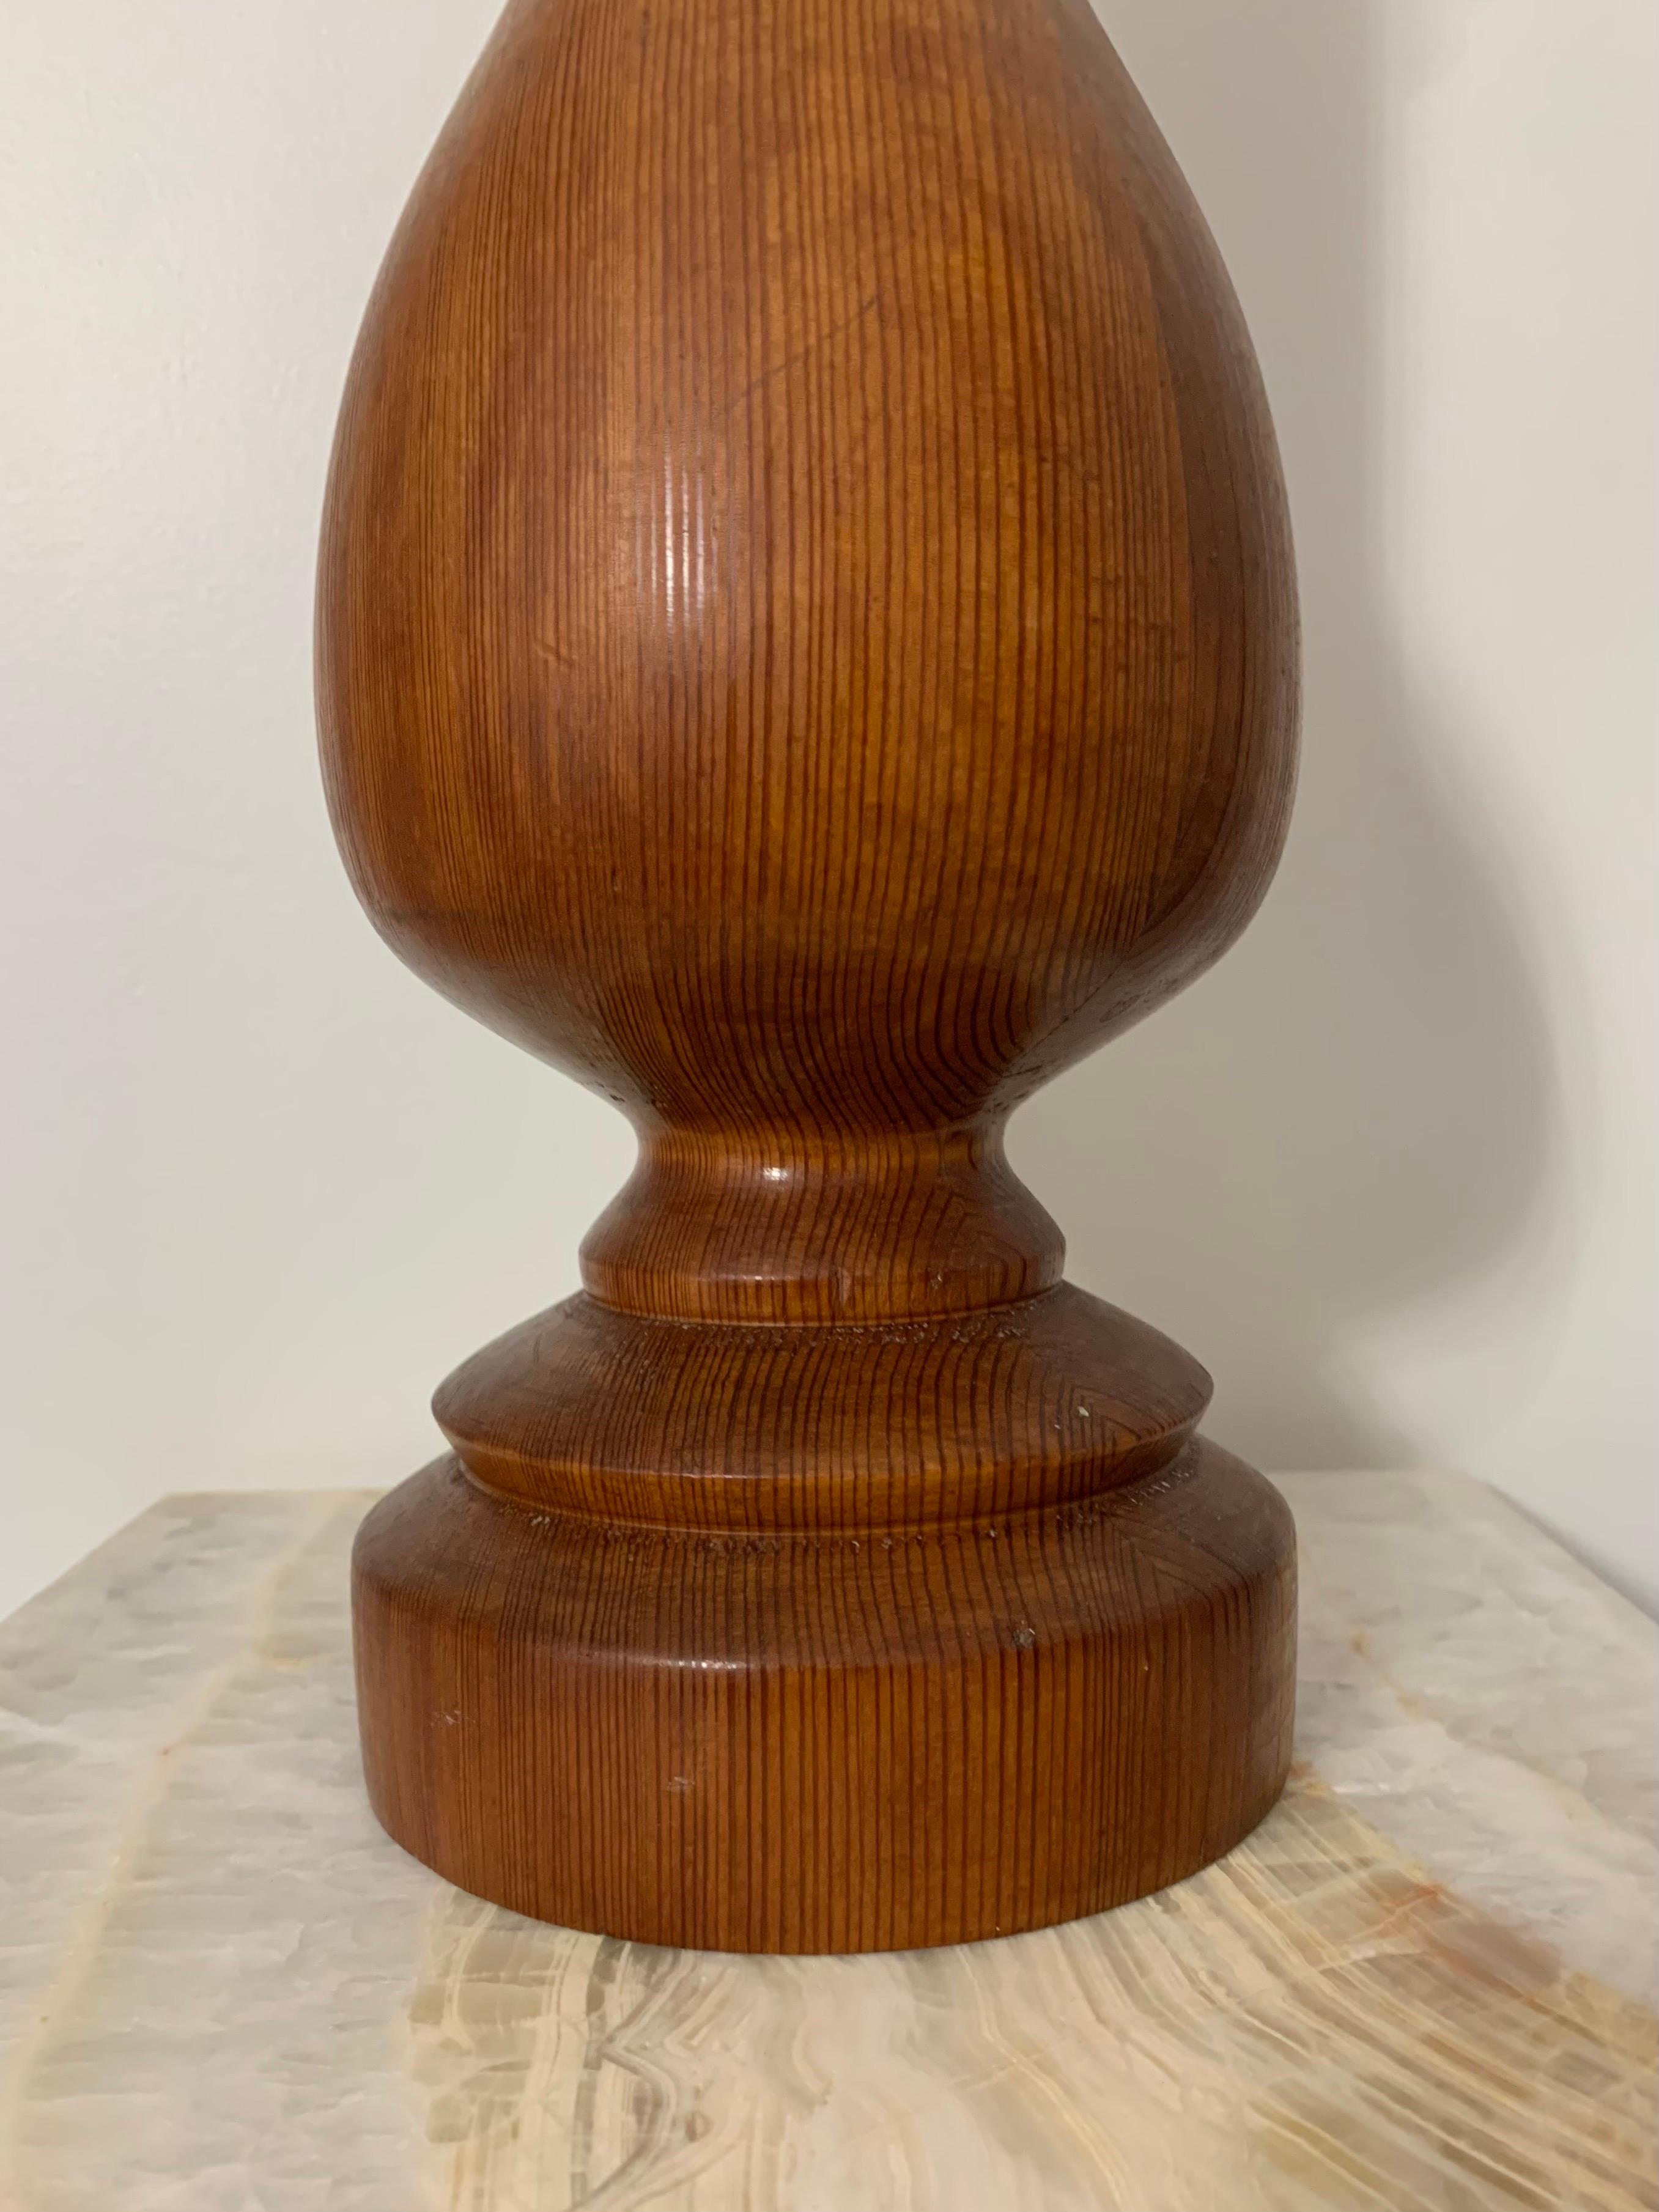 North American American Craft, Reclaimed Turned Wood Table Lamp, 1970s For Sale